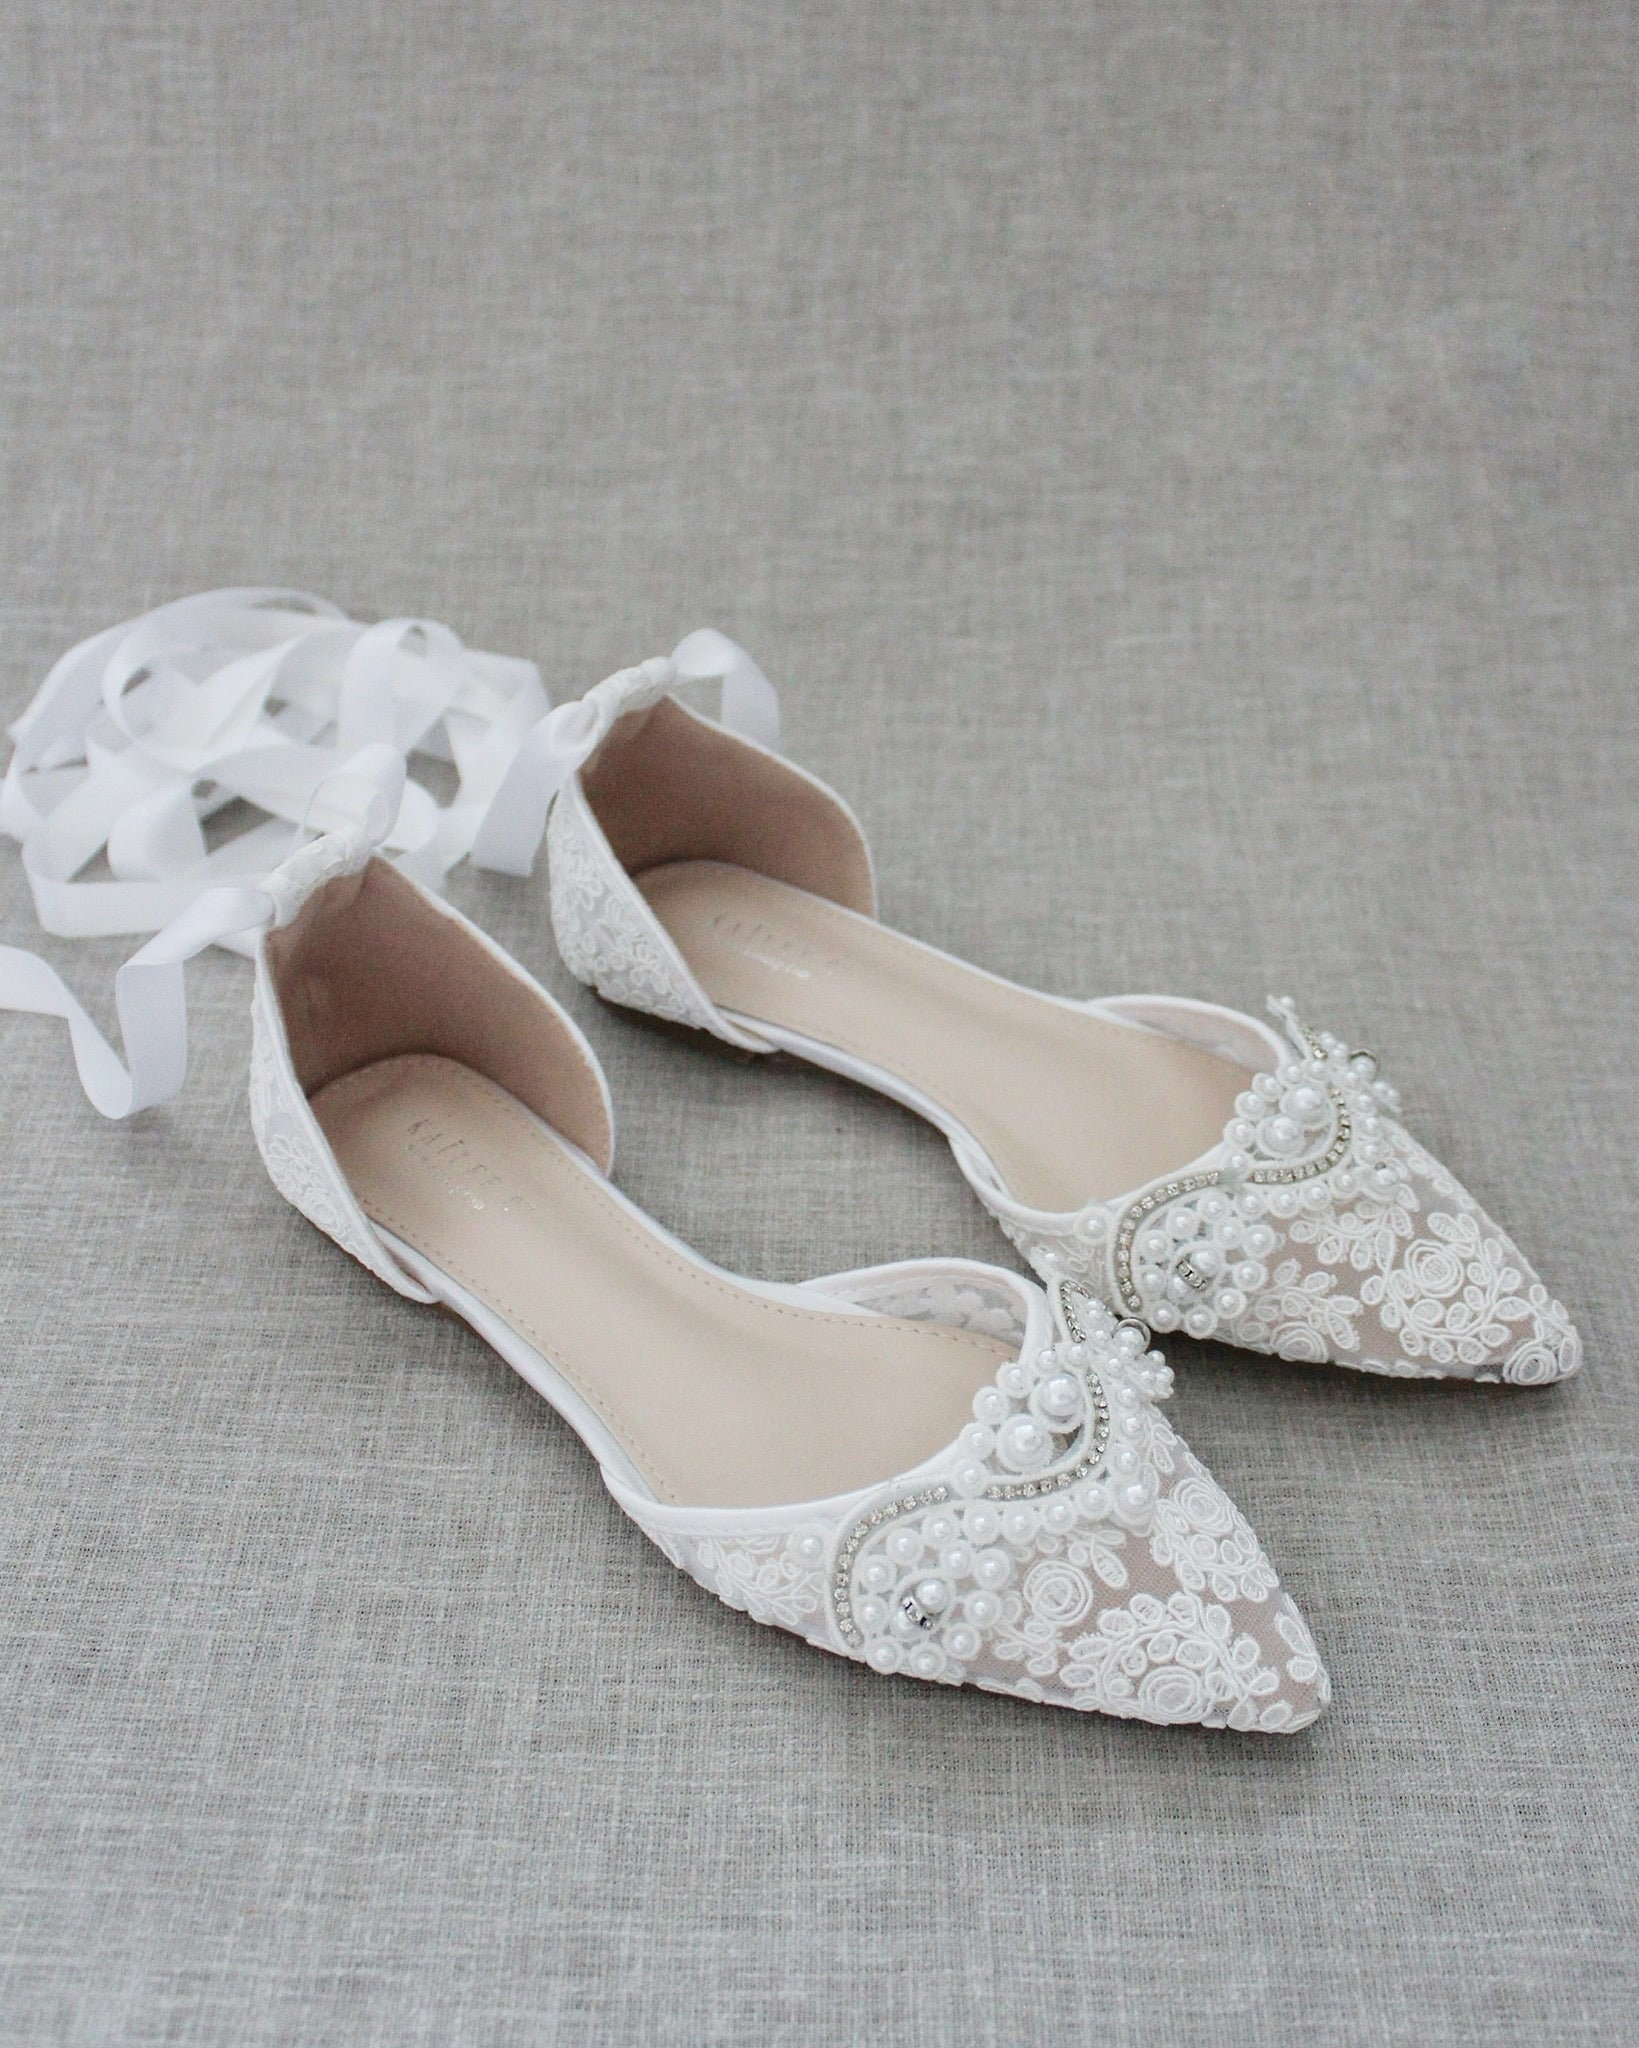 White Crochet Lace Pointy Toe Flats With Small Pearls Applique - Etsy ...